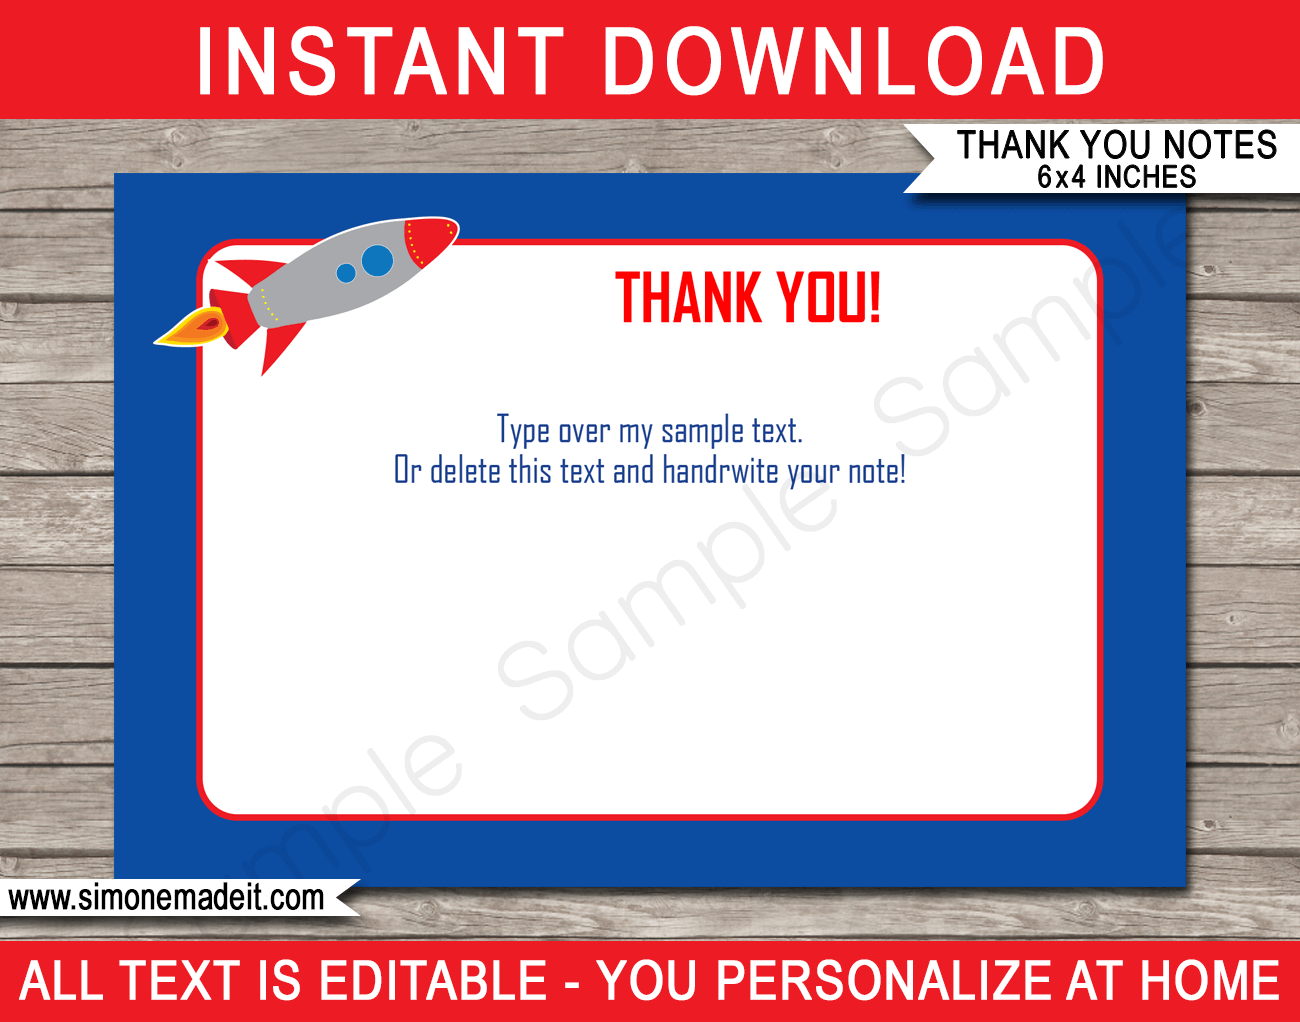 Printable Rocketship Thank You Note Cards - Favor Tags - Space or Astronaut Birthday Party theme - Editable Template - Instant Download via simonemadeit.com